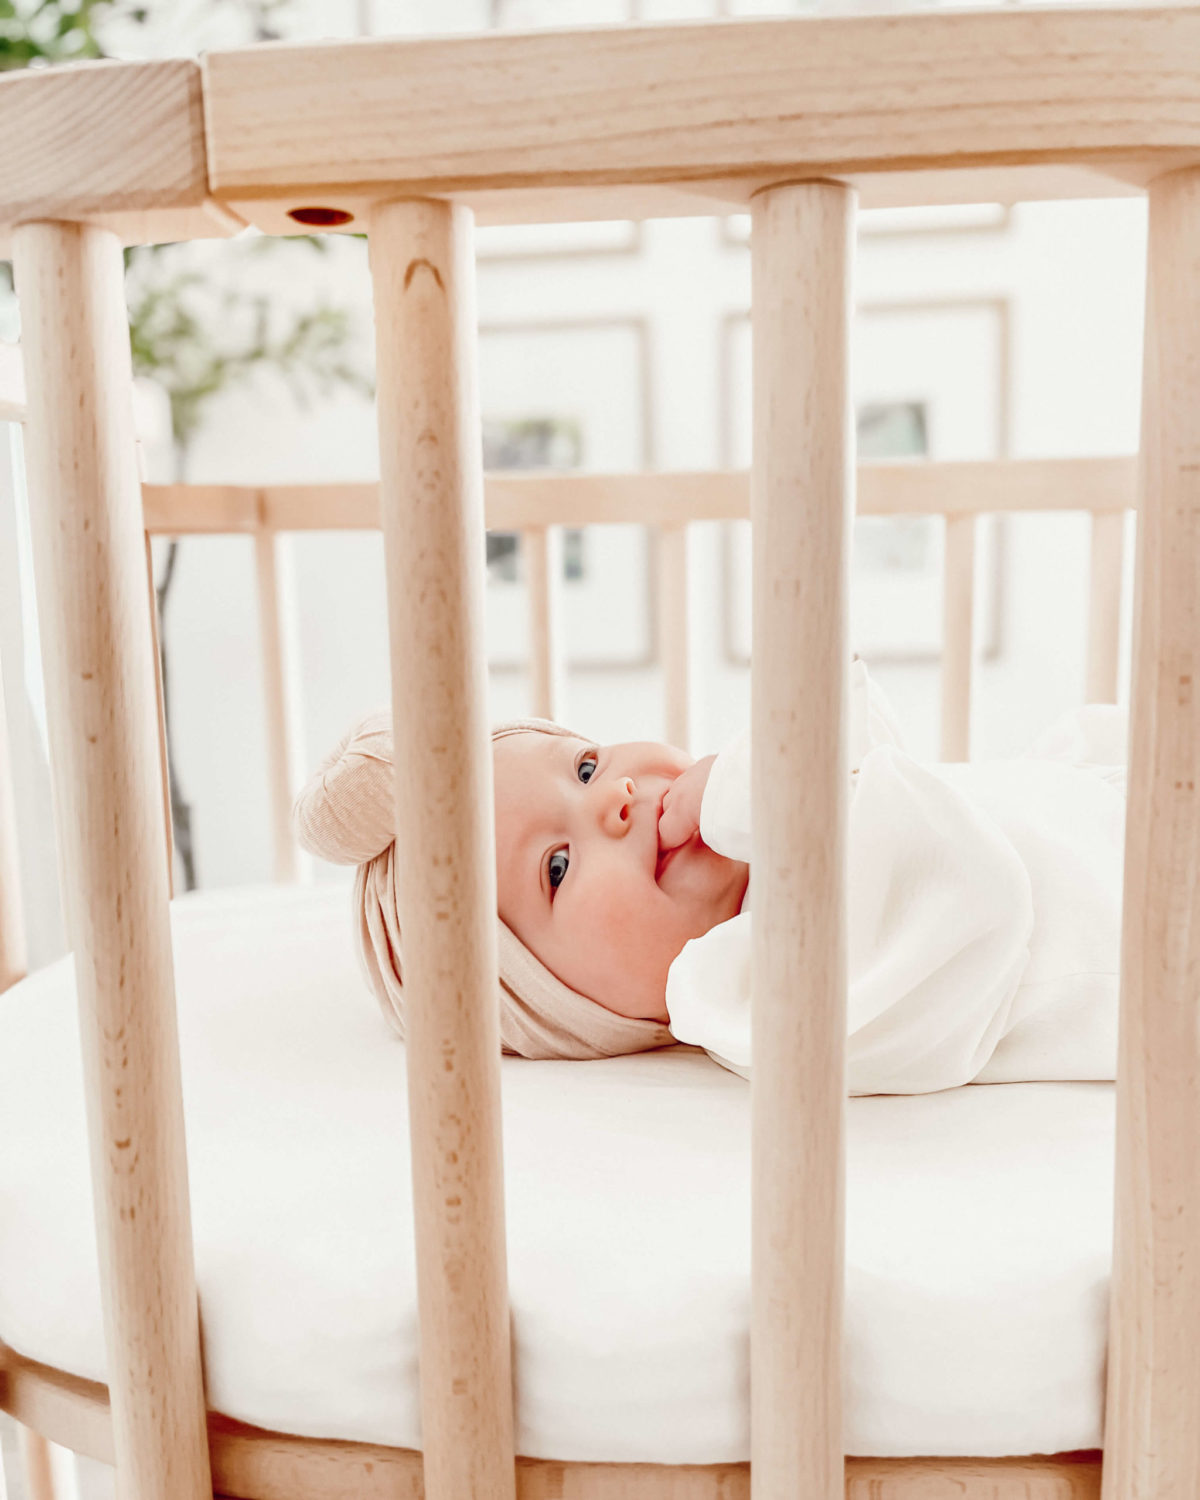 The Secret Behind How to Transition from Co Sleeping to Crib: Be Consistent